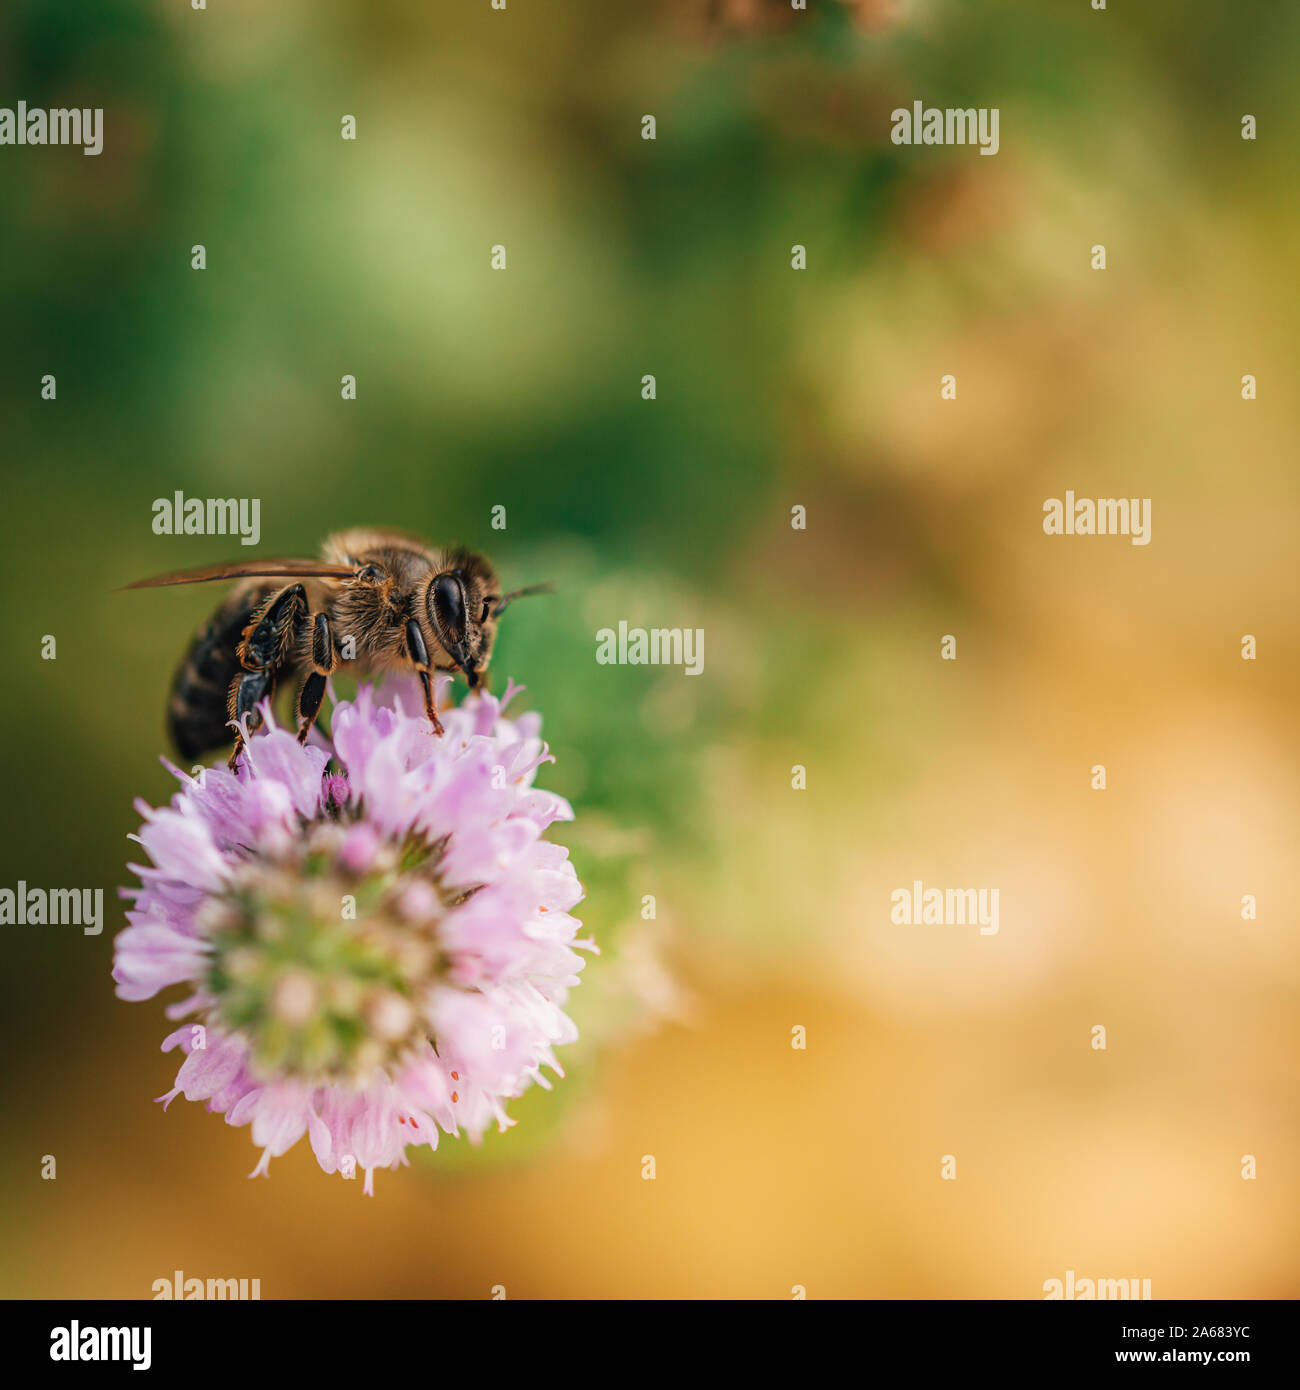 Bee licking nectar, the drink of the gods, from a mint flower in late summer, while the sun is rising. Stock Photo